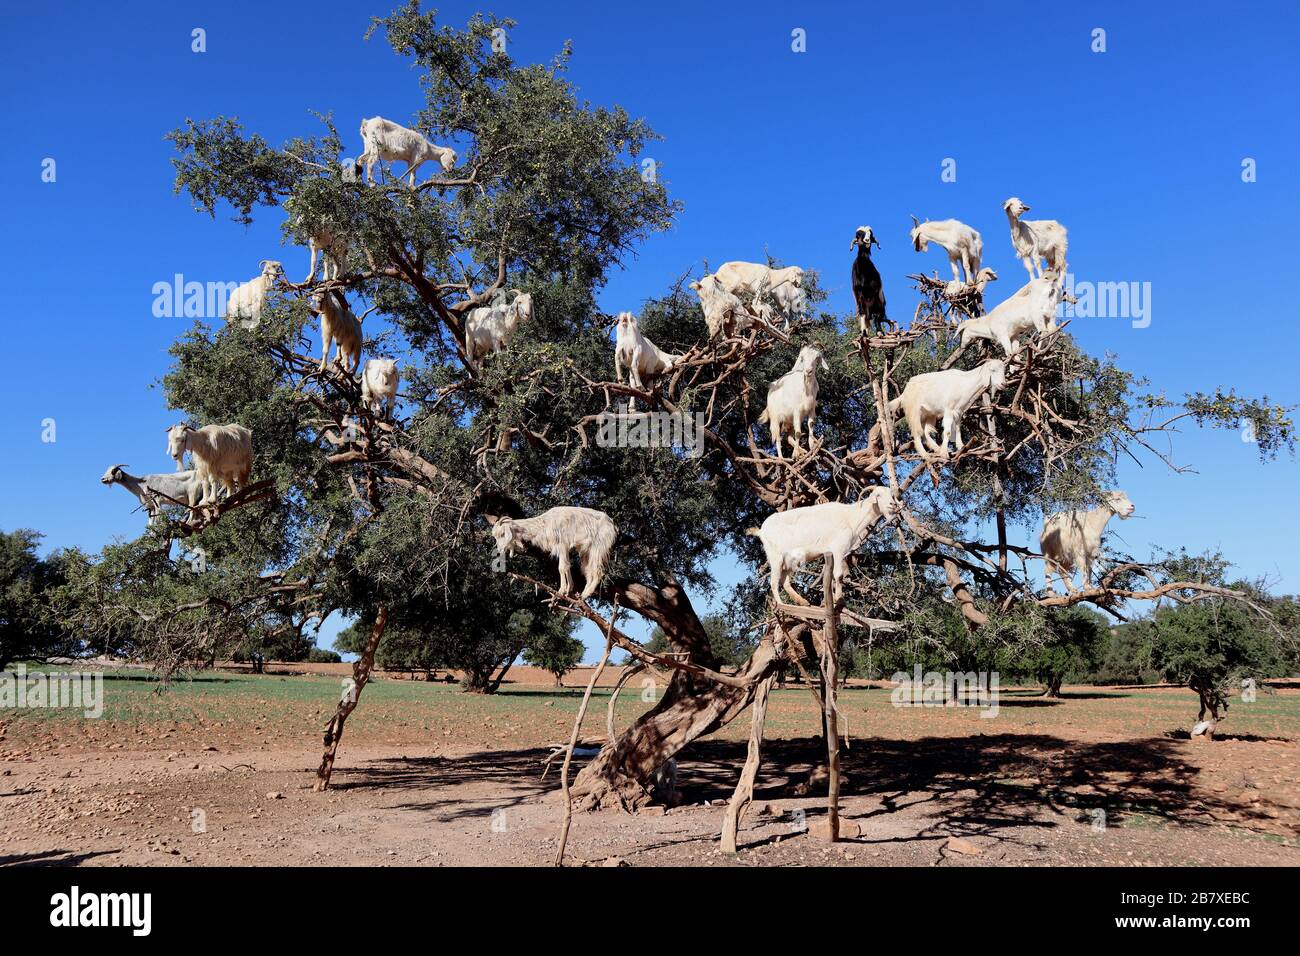 Marrakesh Morocco Goats up a tree eating nuts Stock Photo